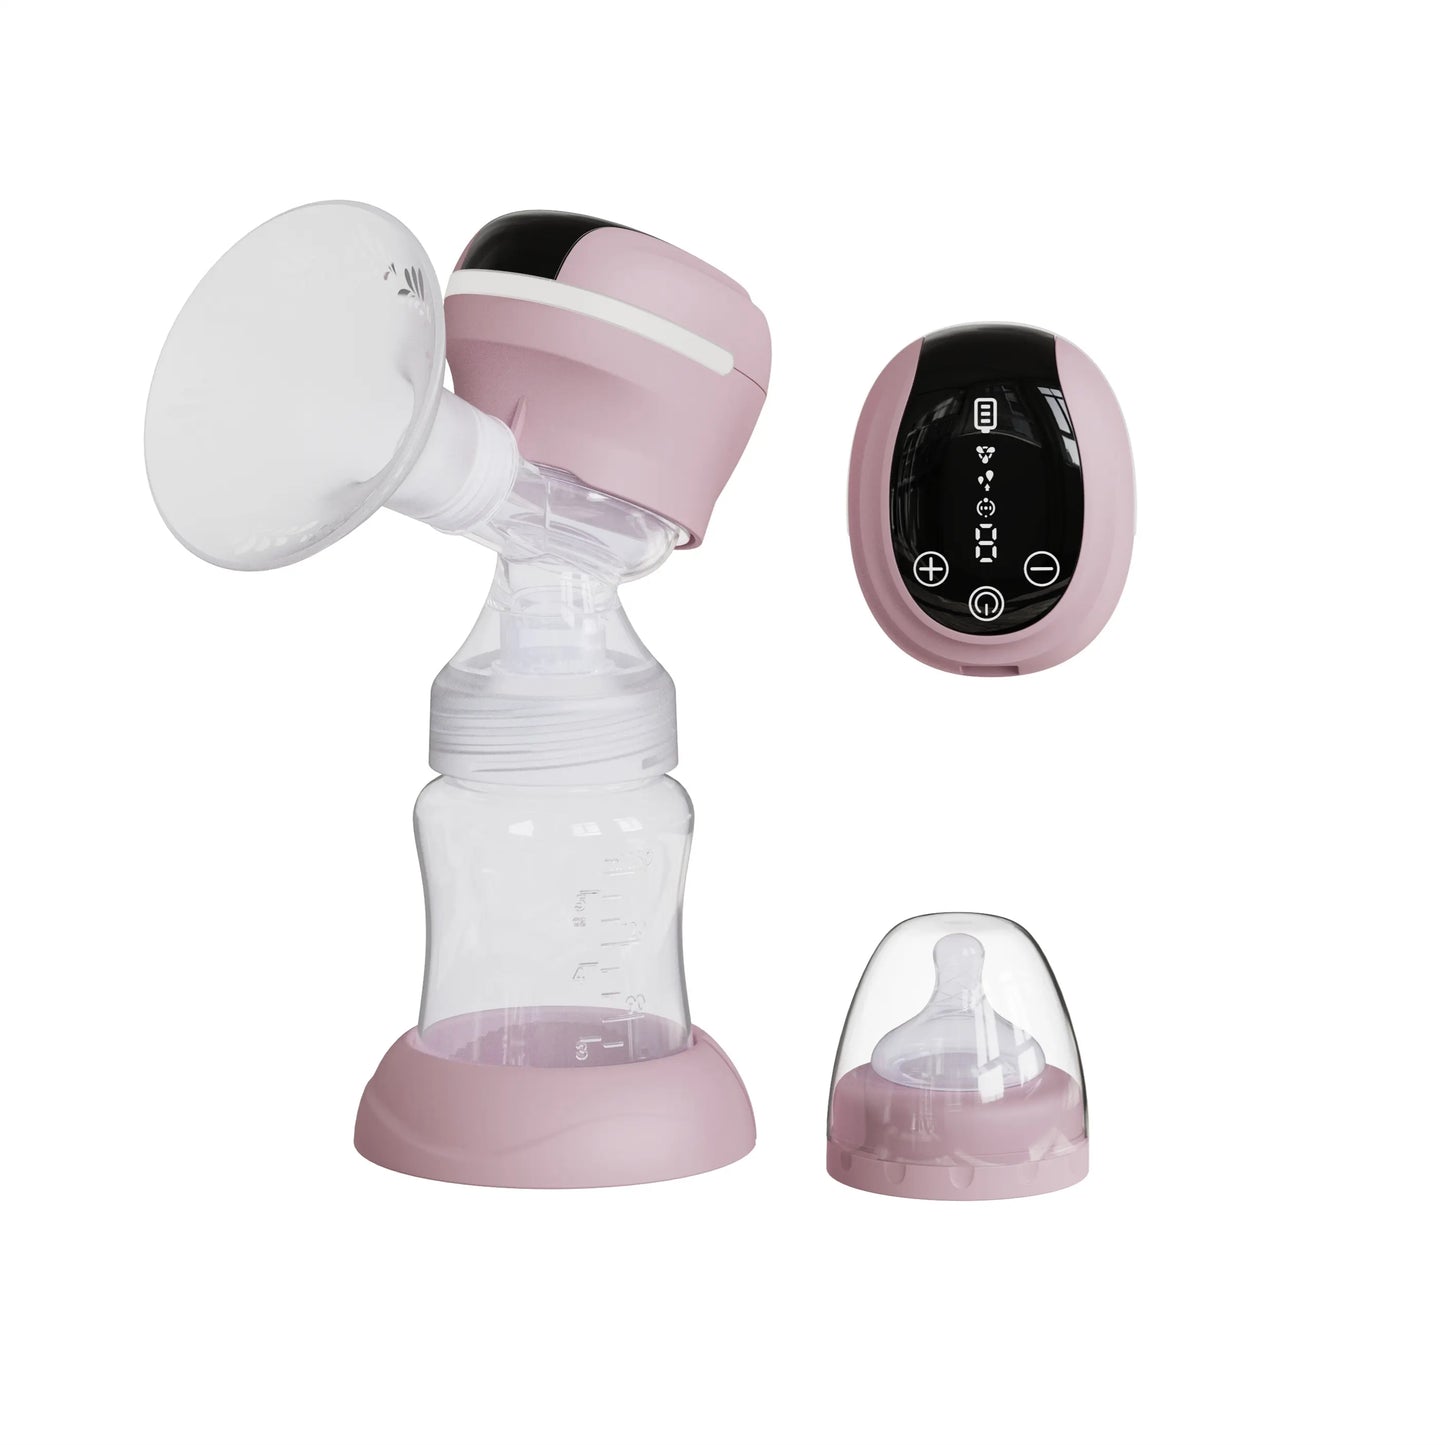 Top Automatic Intelligent Portable Electric Breast Pump for Women 3 Loading Packaging Fundas Manual Breast Pump